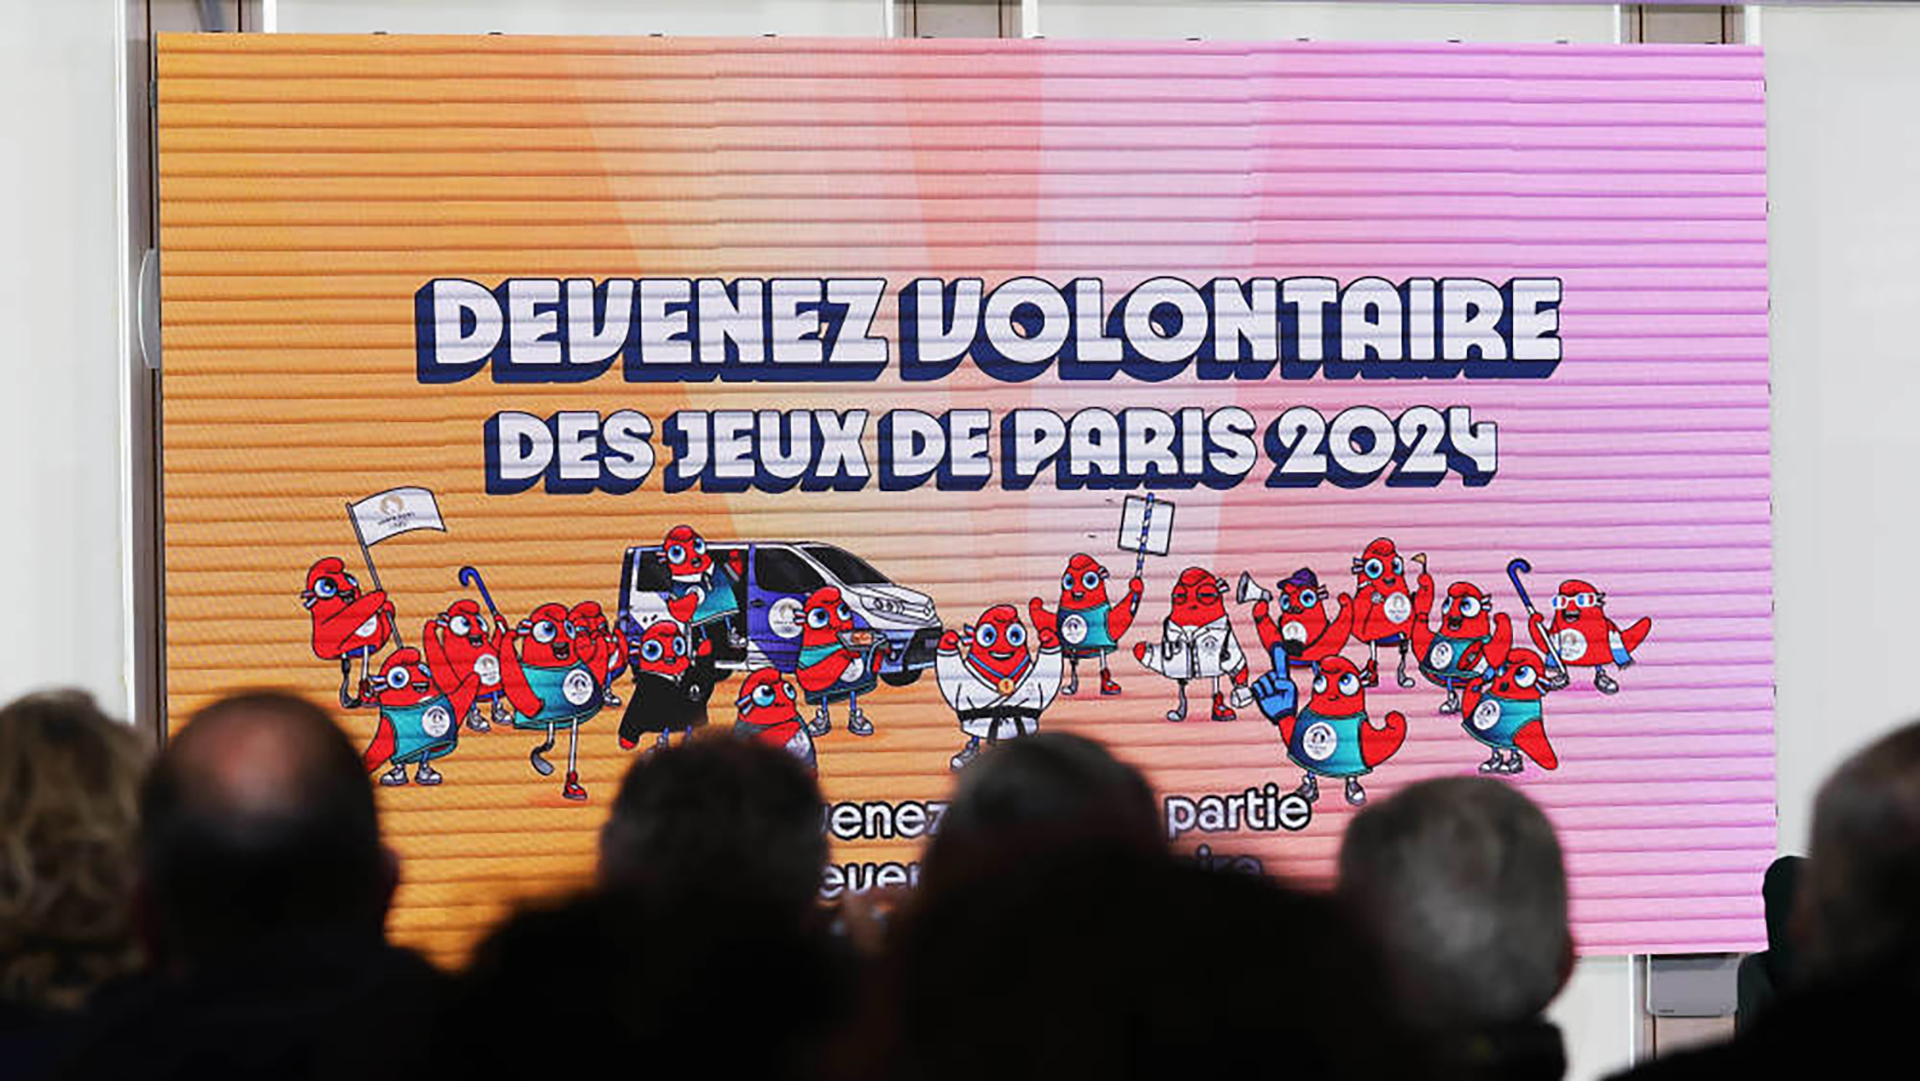 The volunteer process for Paris 2024 has opened: there will be 45 thousand selected, but they expect twice as many applicants